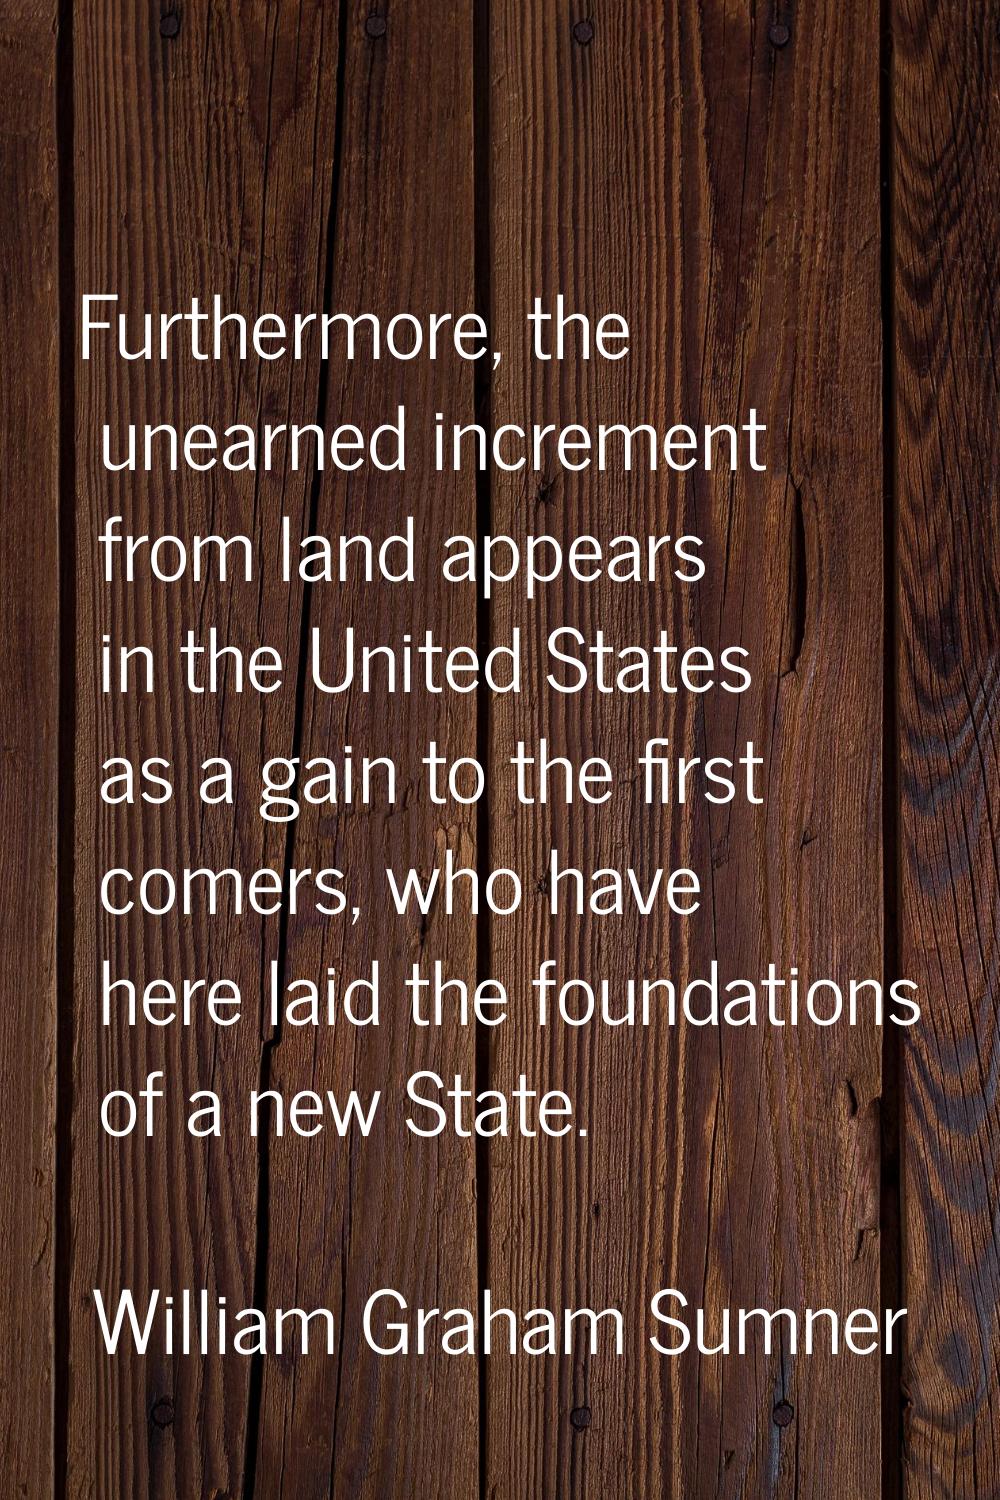 Furthermore, the unearned increment from land appears in the United States as a gain to the first c